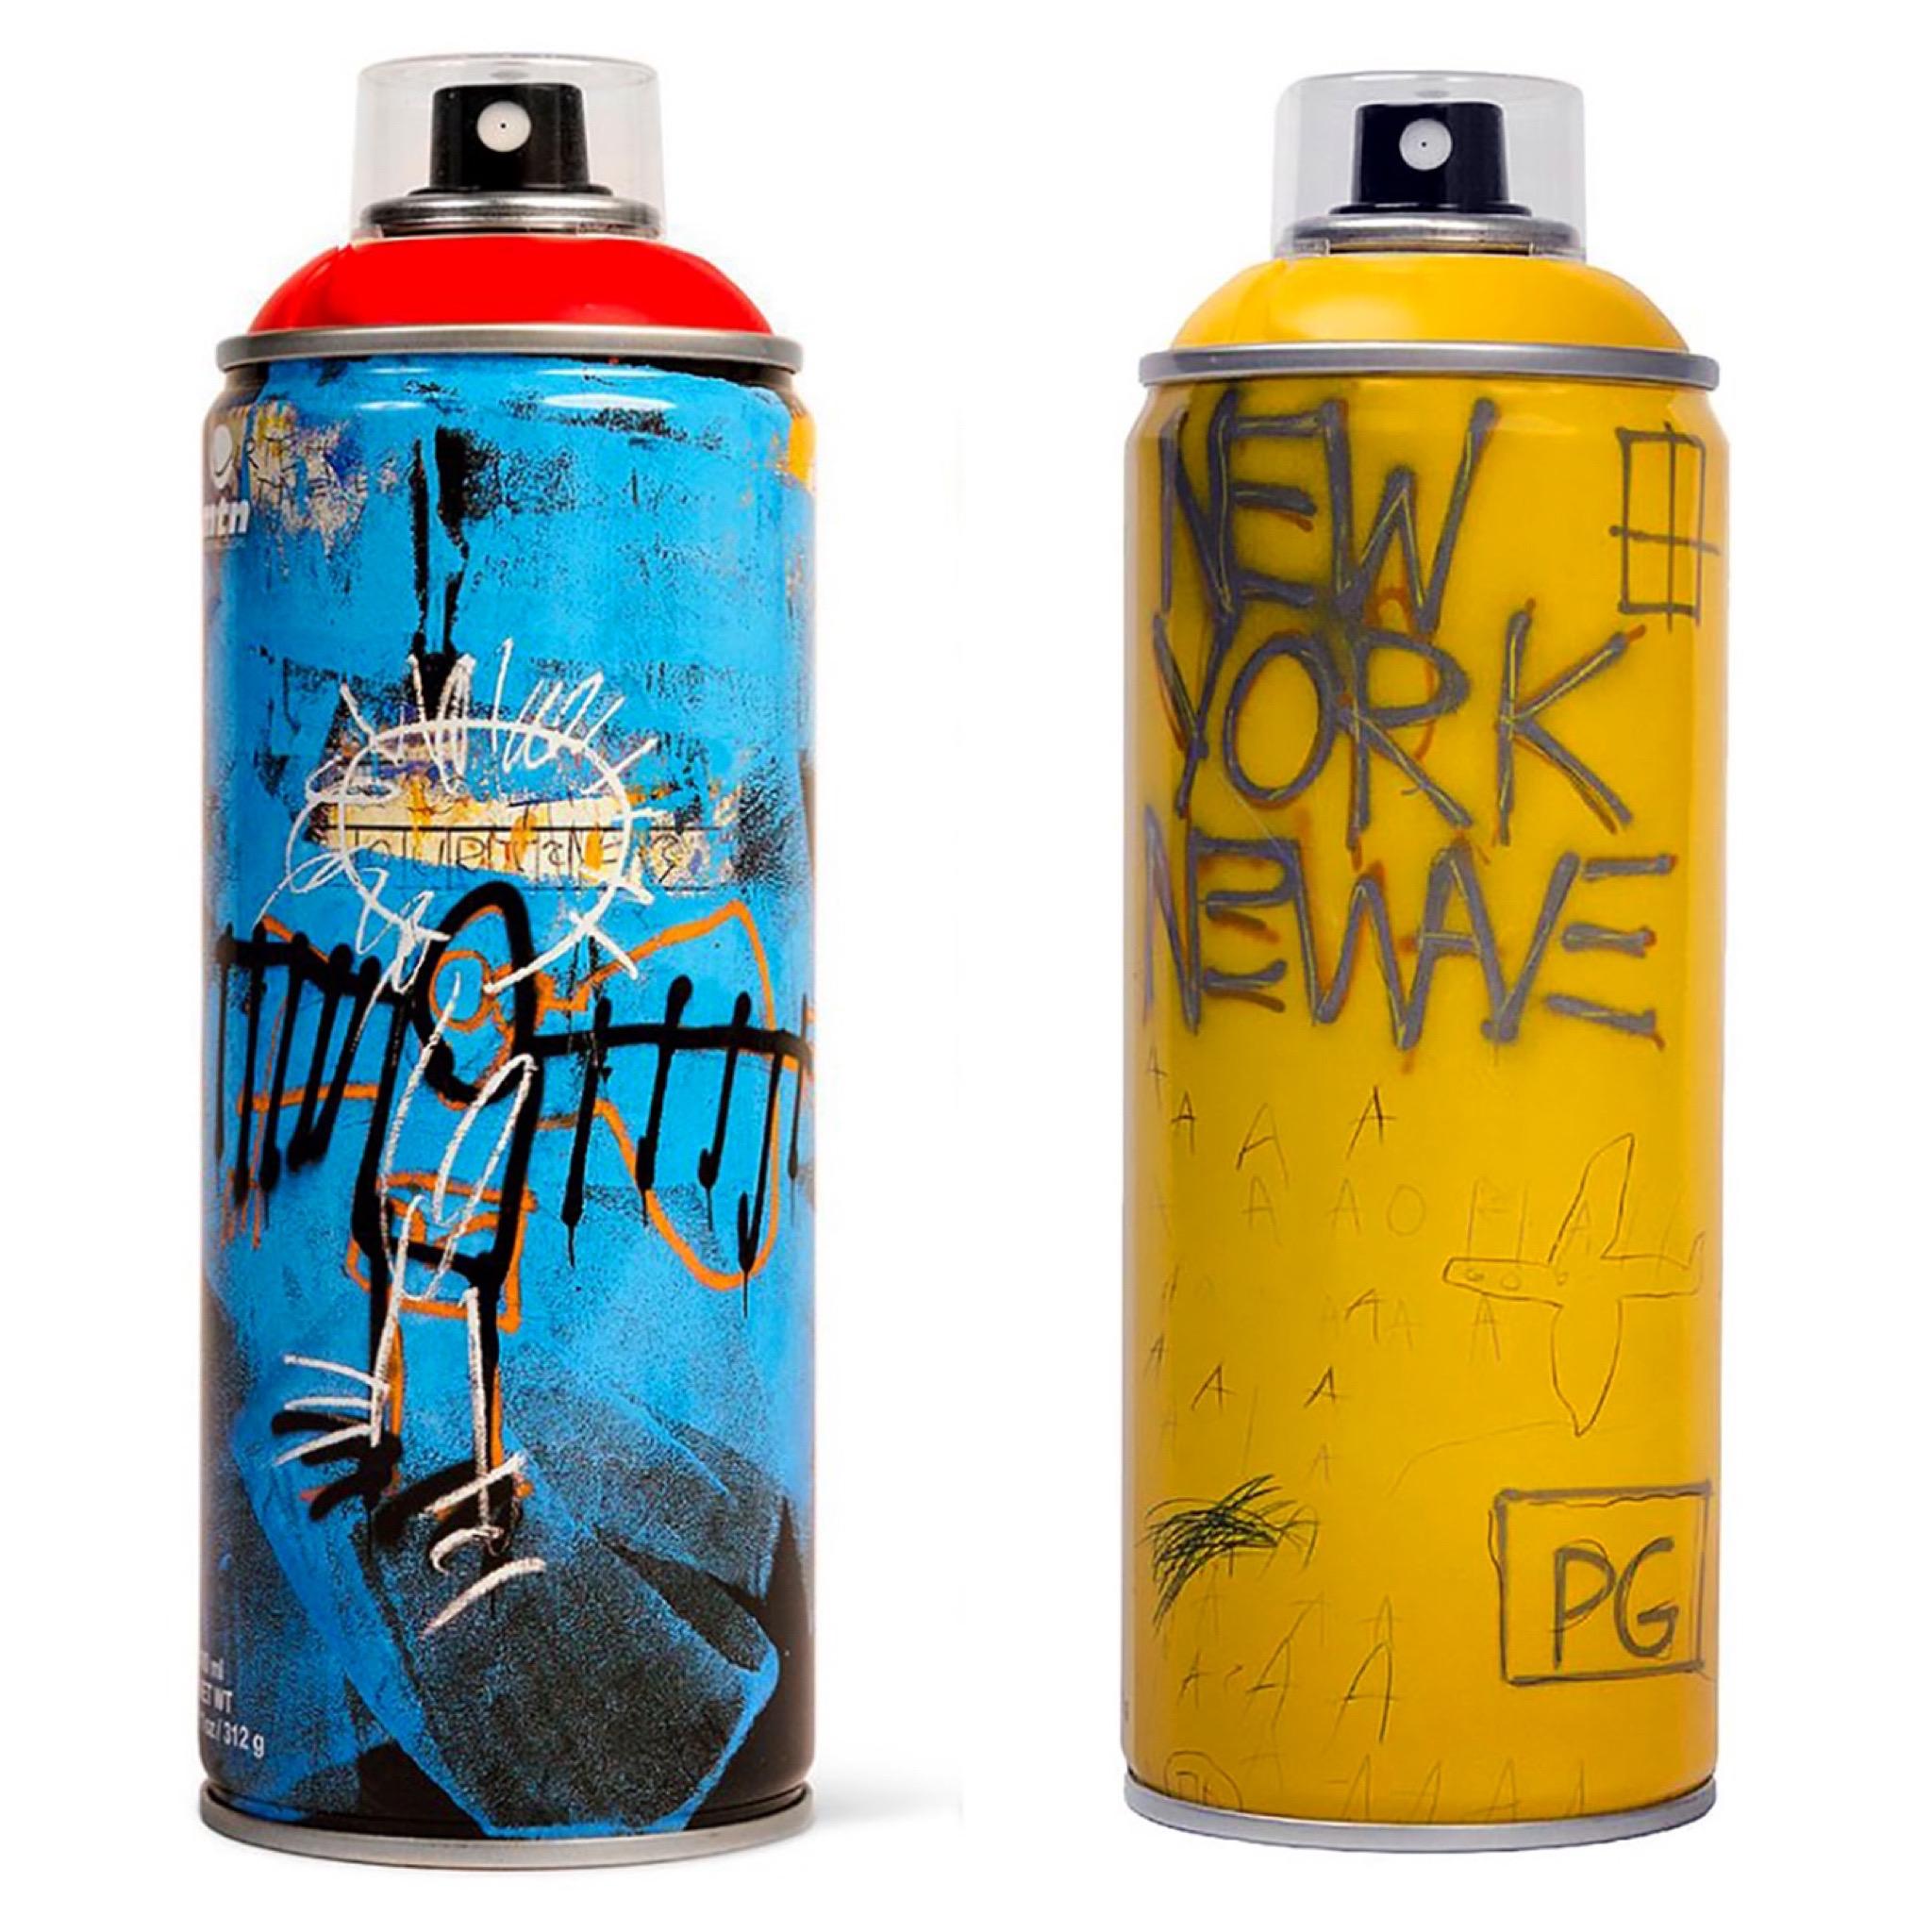 Limited edition Basquiat spray paint can (set of 2) - Mixed Media Art by (after) Jean-Michel Basquiat